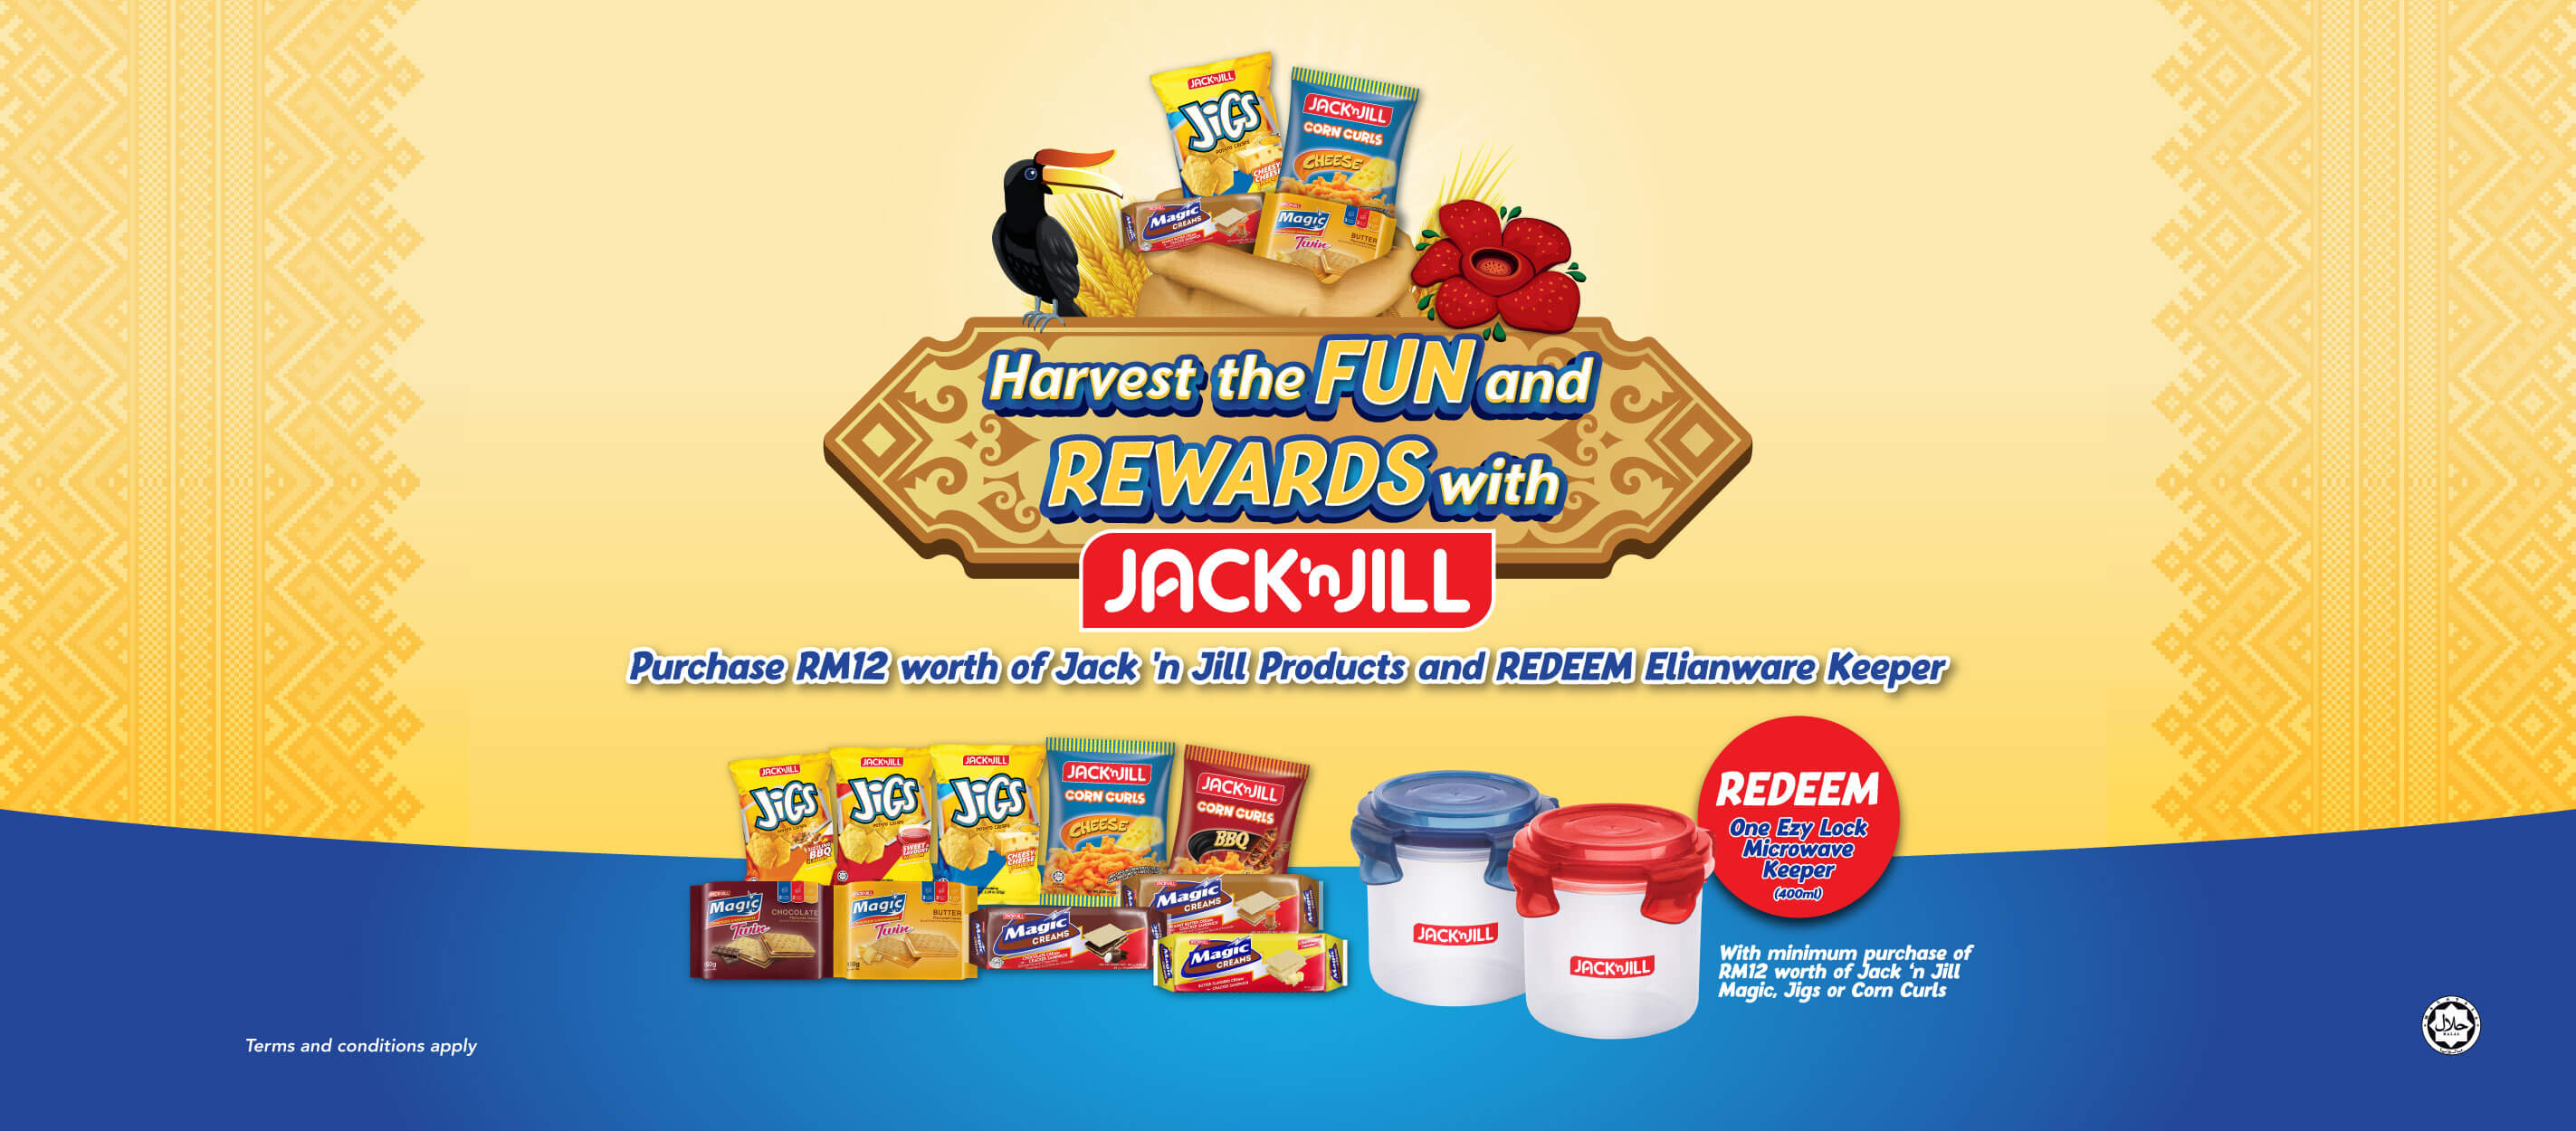 Harvest the FUN and REWARDS with JACK ‘n JILL